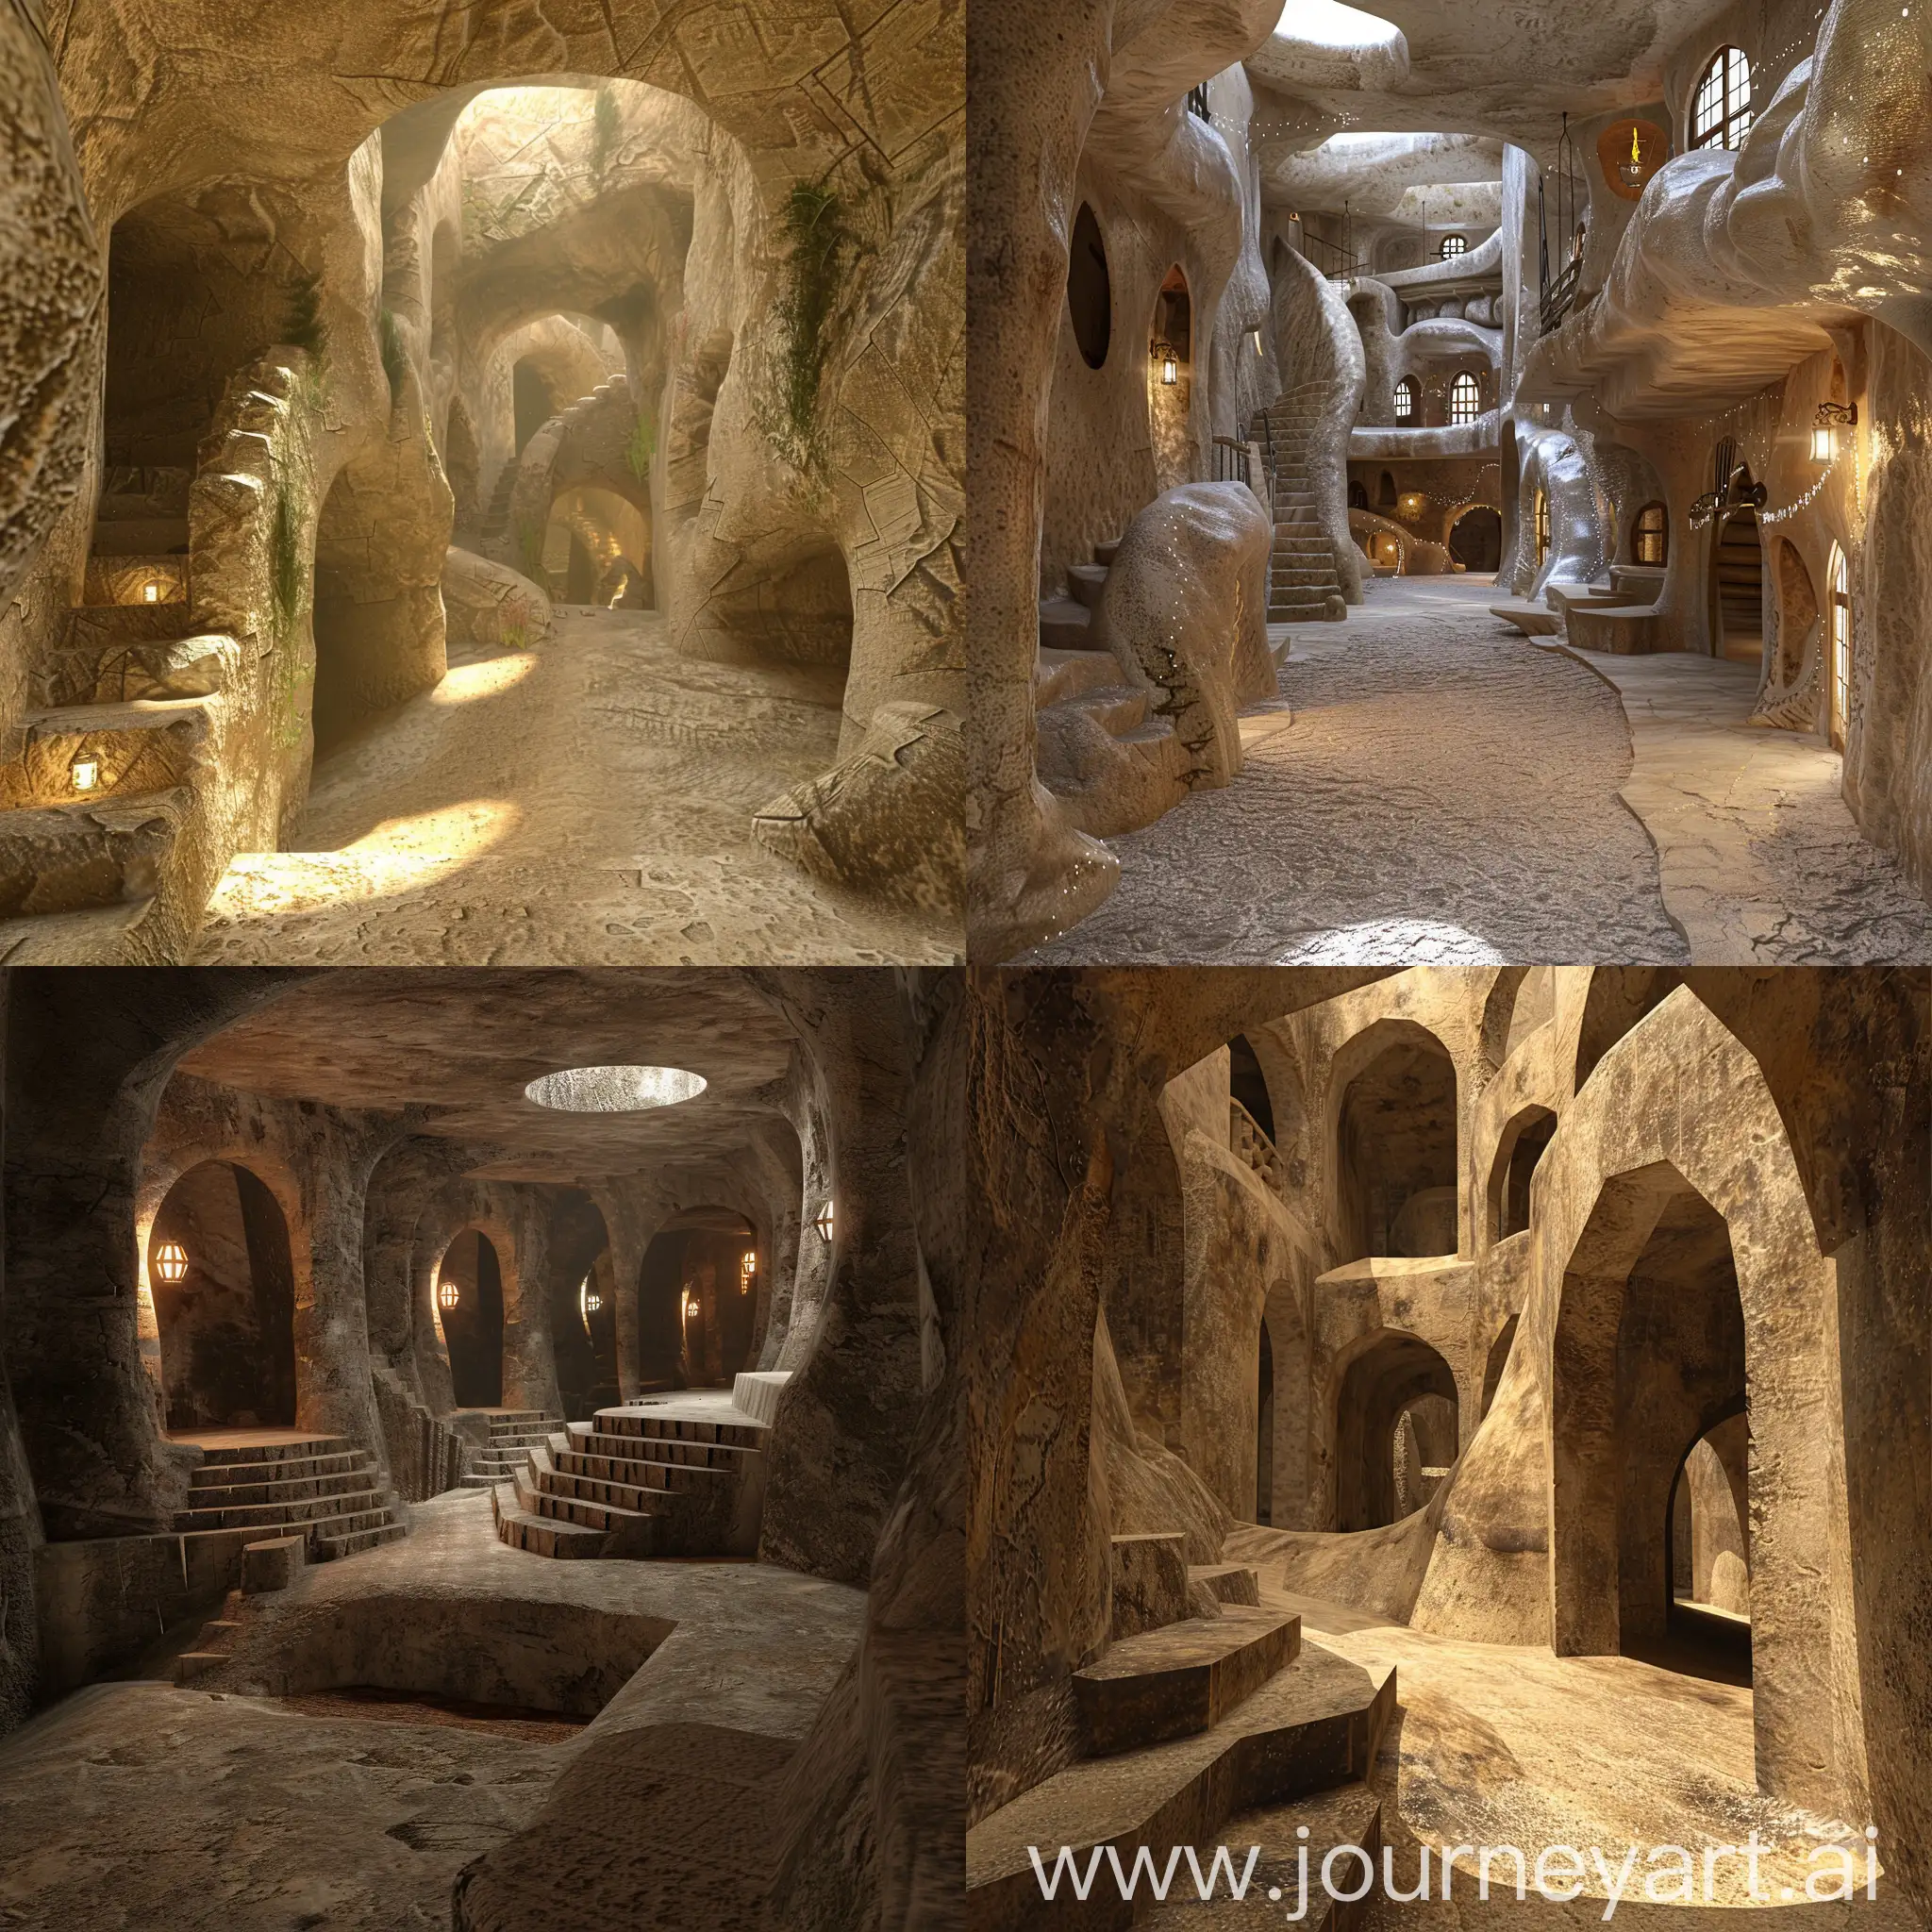 A 3D and animated digital image of the underground city of Derinkuyo, which can be displayed from different angles with the user's click and provide information about the history and importance of this city.